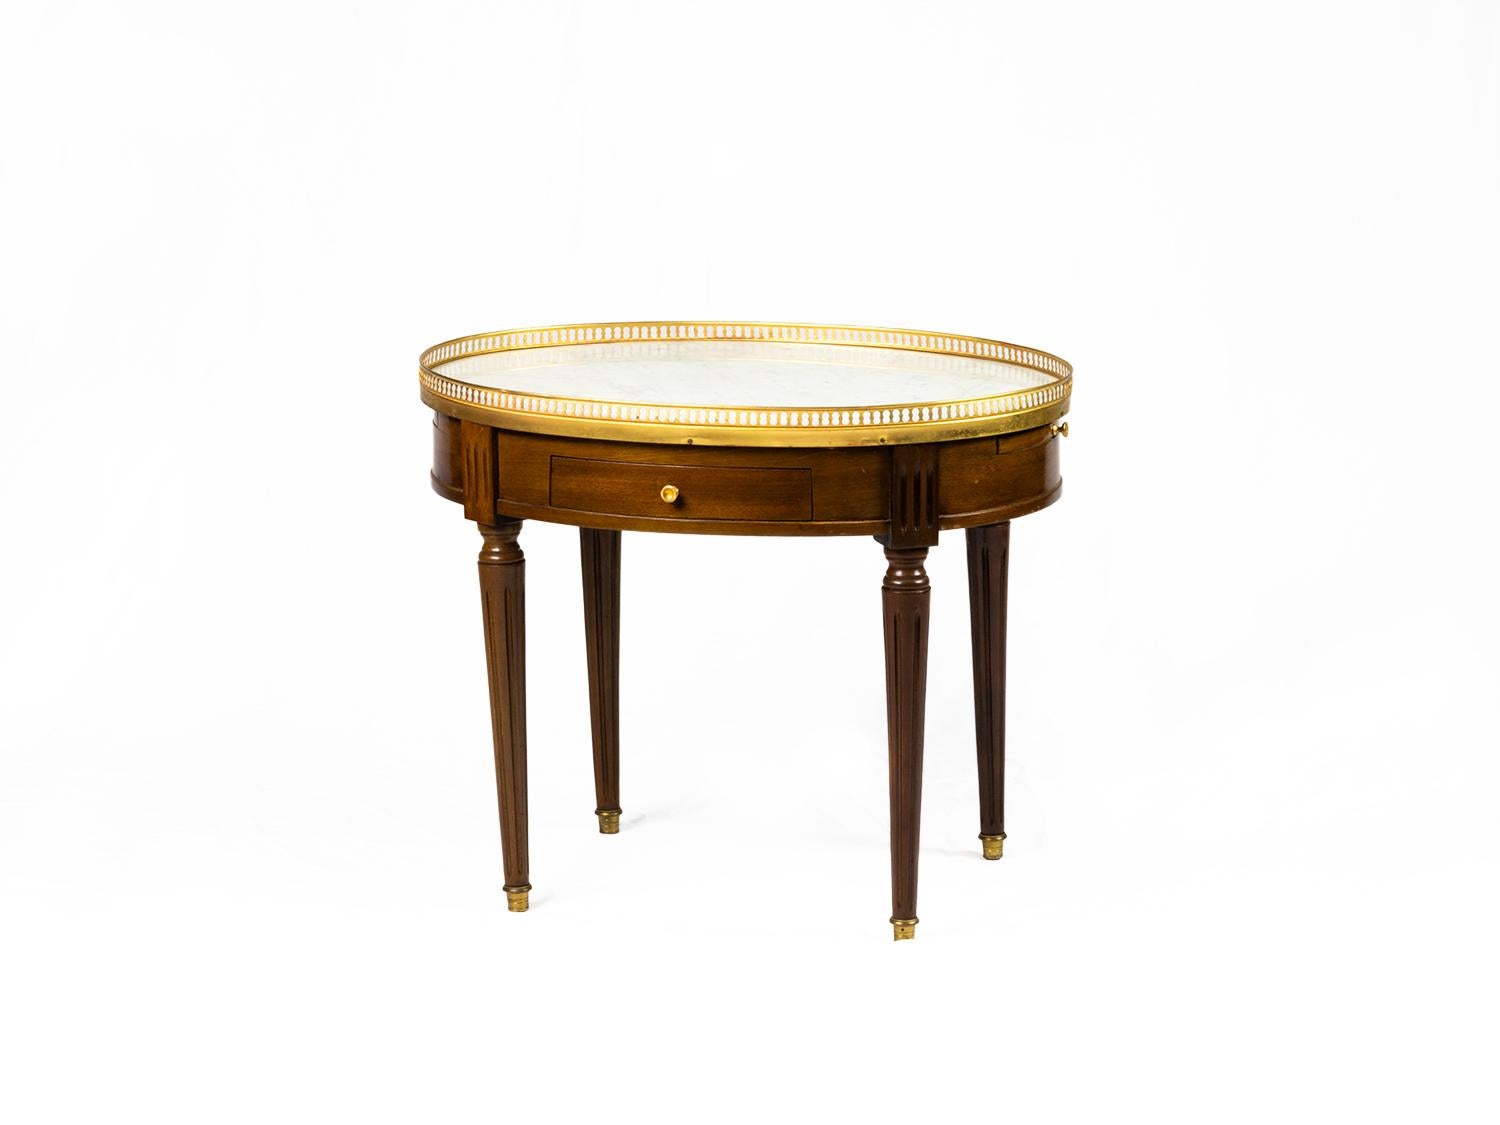 A unique 19th century Louis XVI Style mahogany oval side table Bouillotte.
Marble top, golden rail, two drawers and extensions on each side for glasses with leather lining.